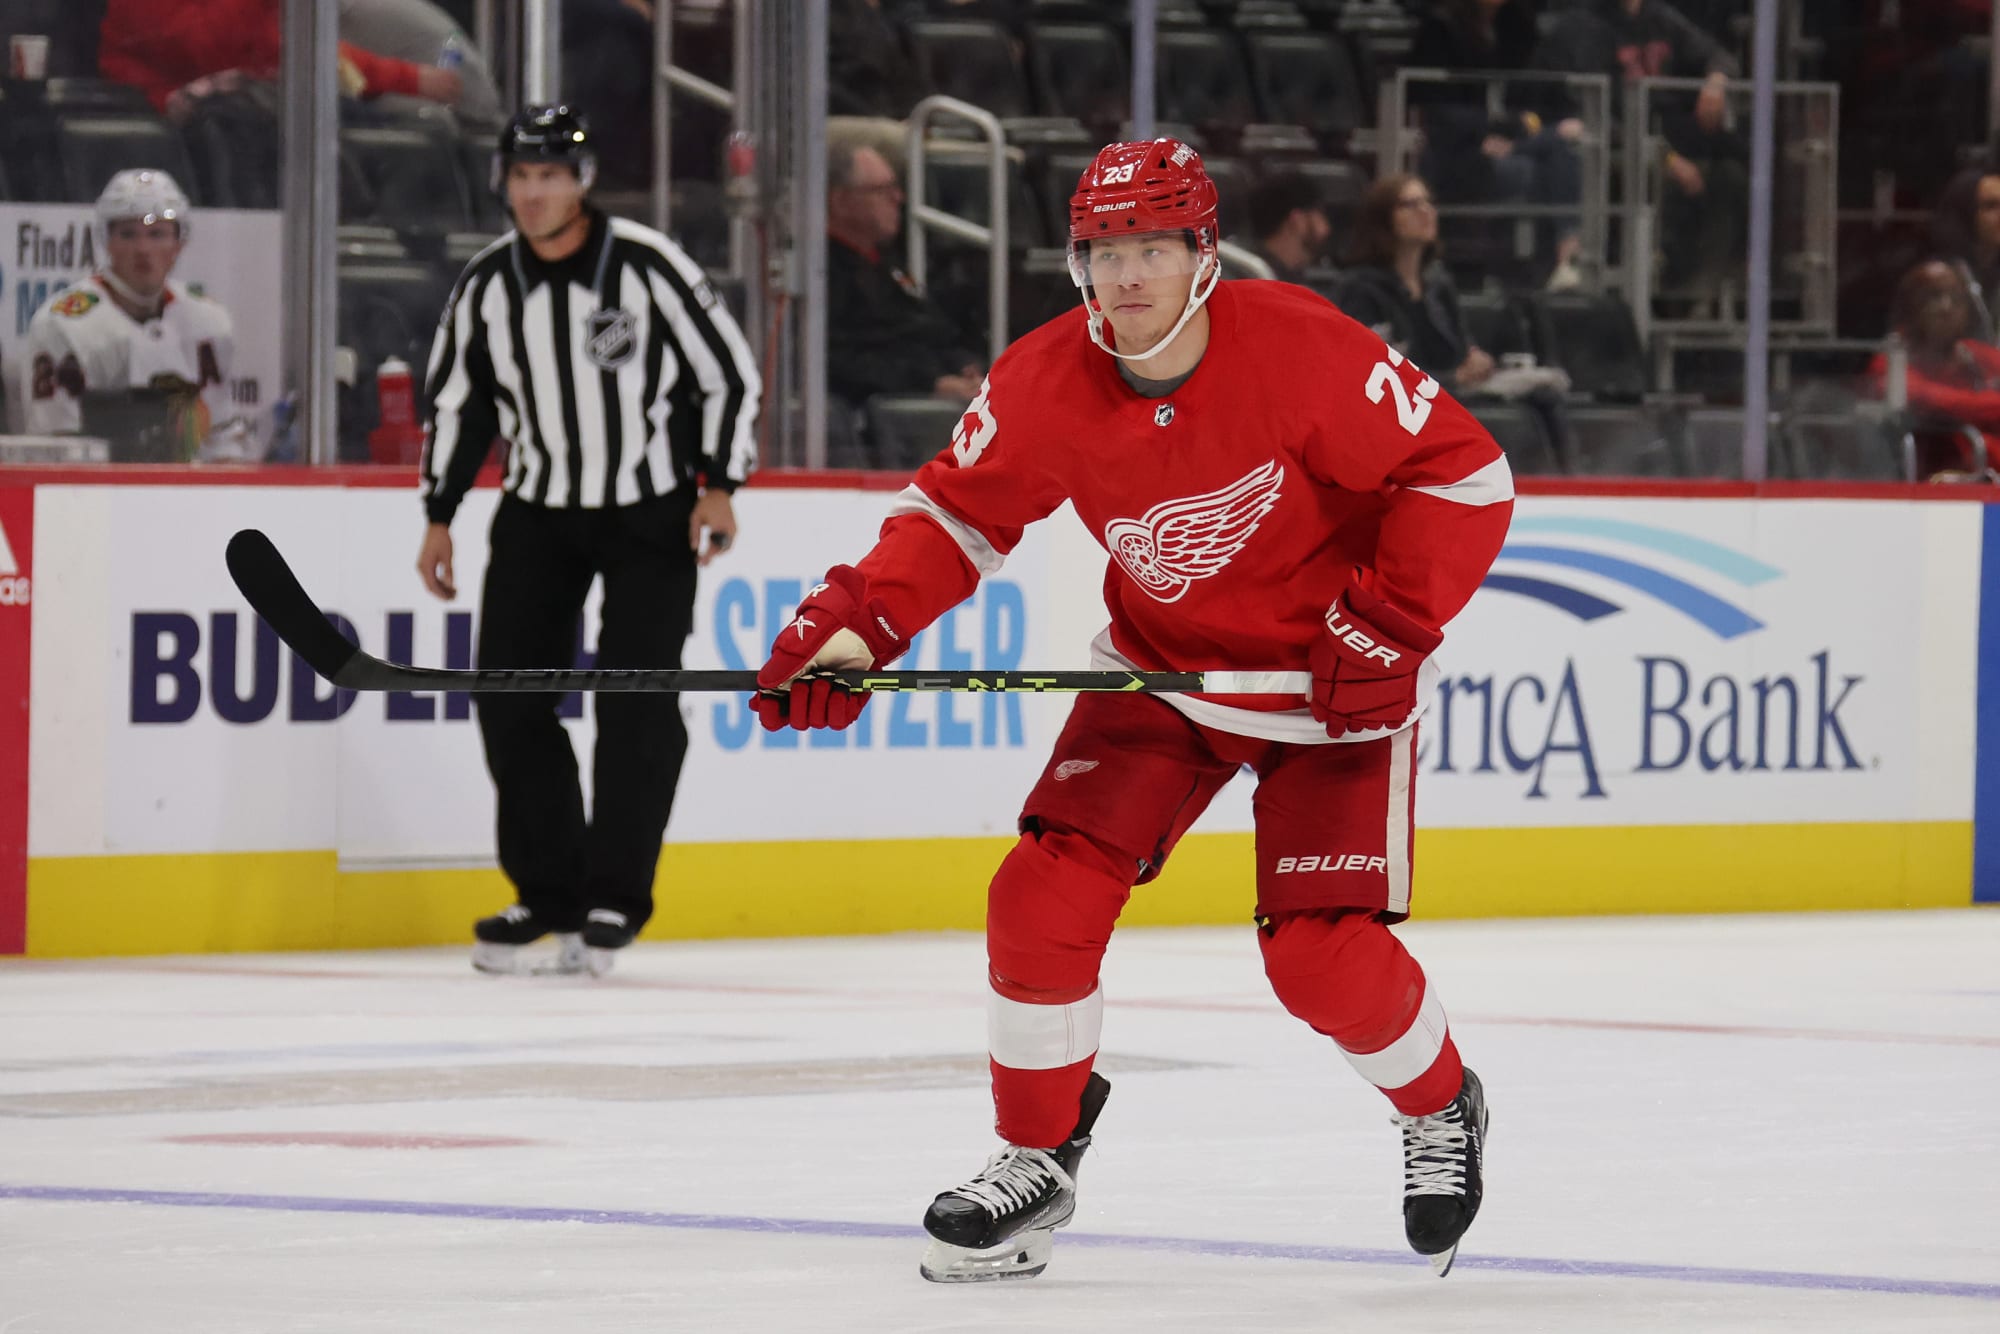 Red Wings fans can vote to send Lucas Raymond to All-Star game